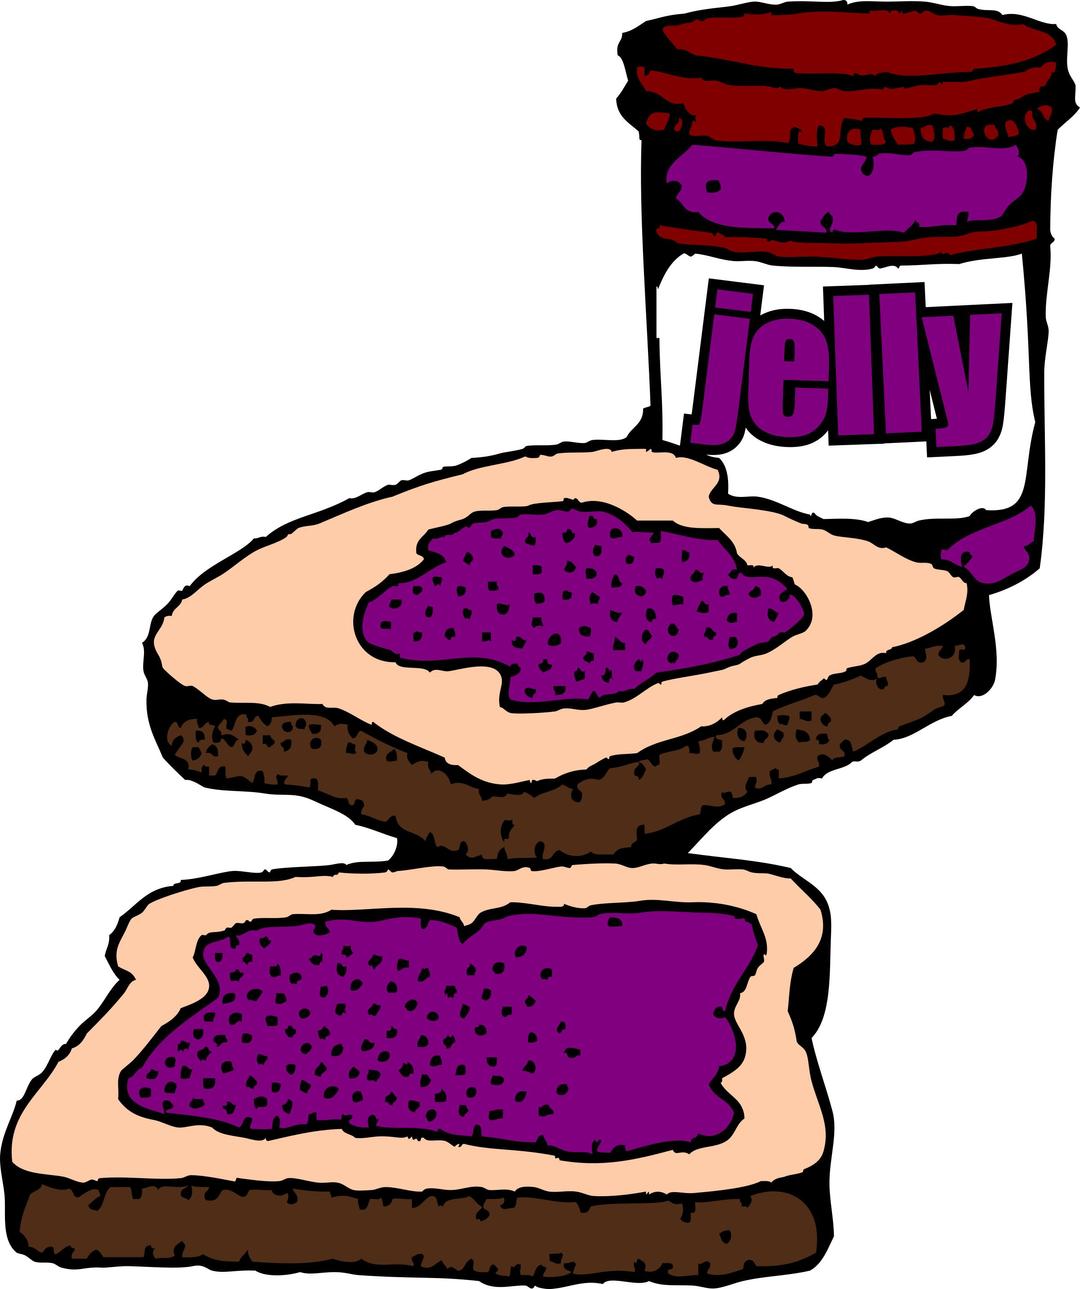 Colorized Peanut butter and jelly sandwich png transparent